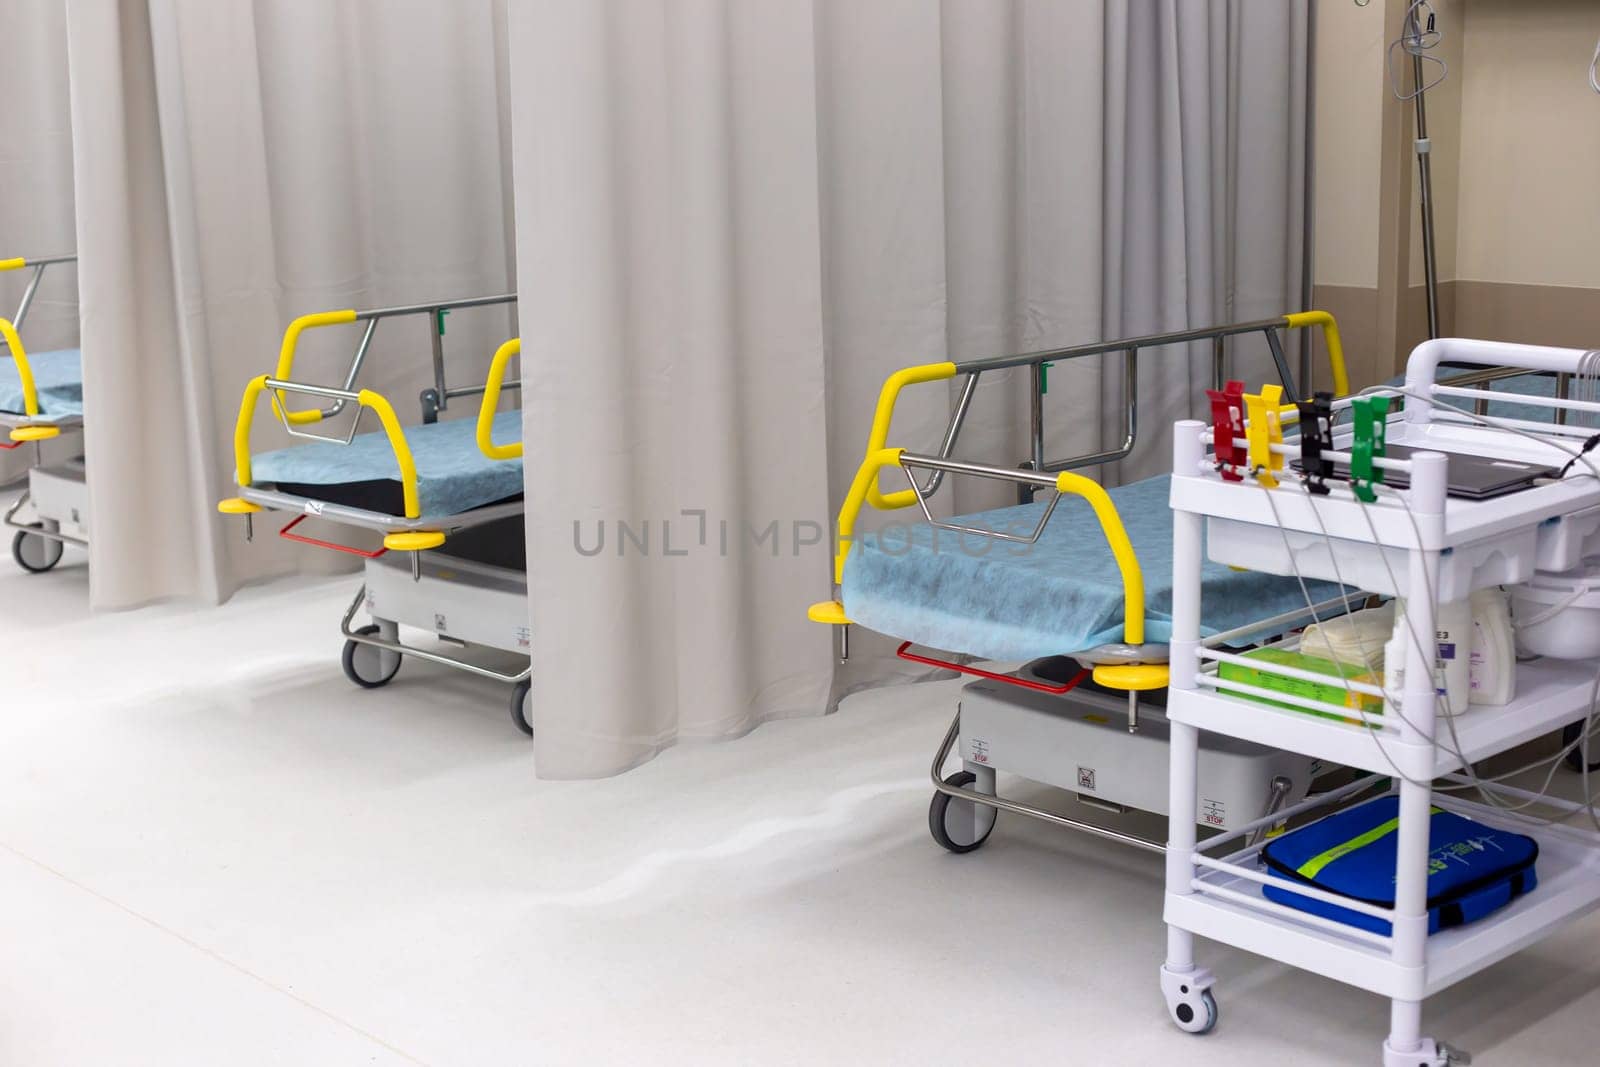 Moscow, Moscow region, Russia - 03.09.2023:Empty hospital ward showing multiple beds with safety rails and a medical cart with supplies, ready for patients